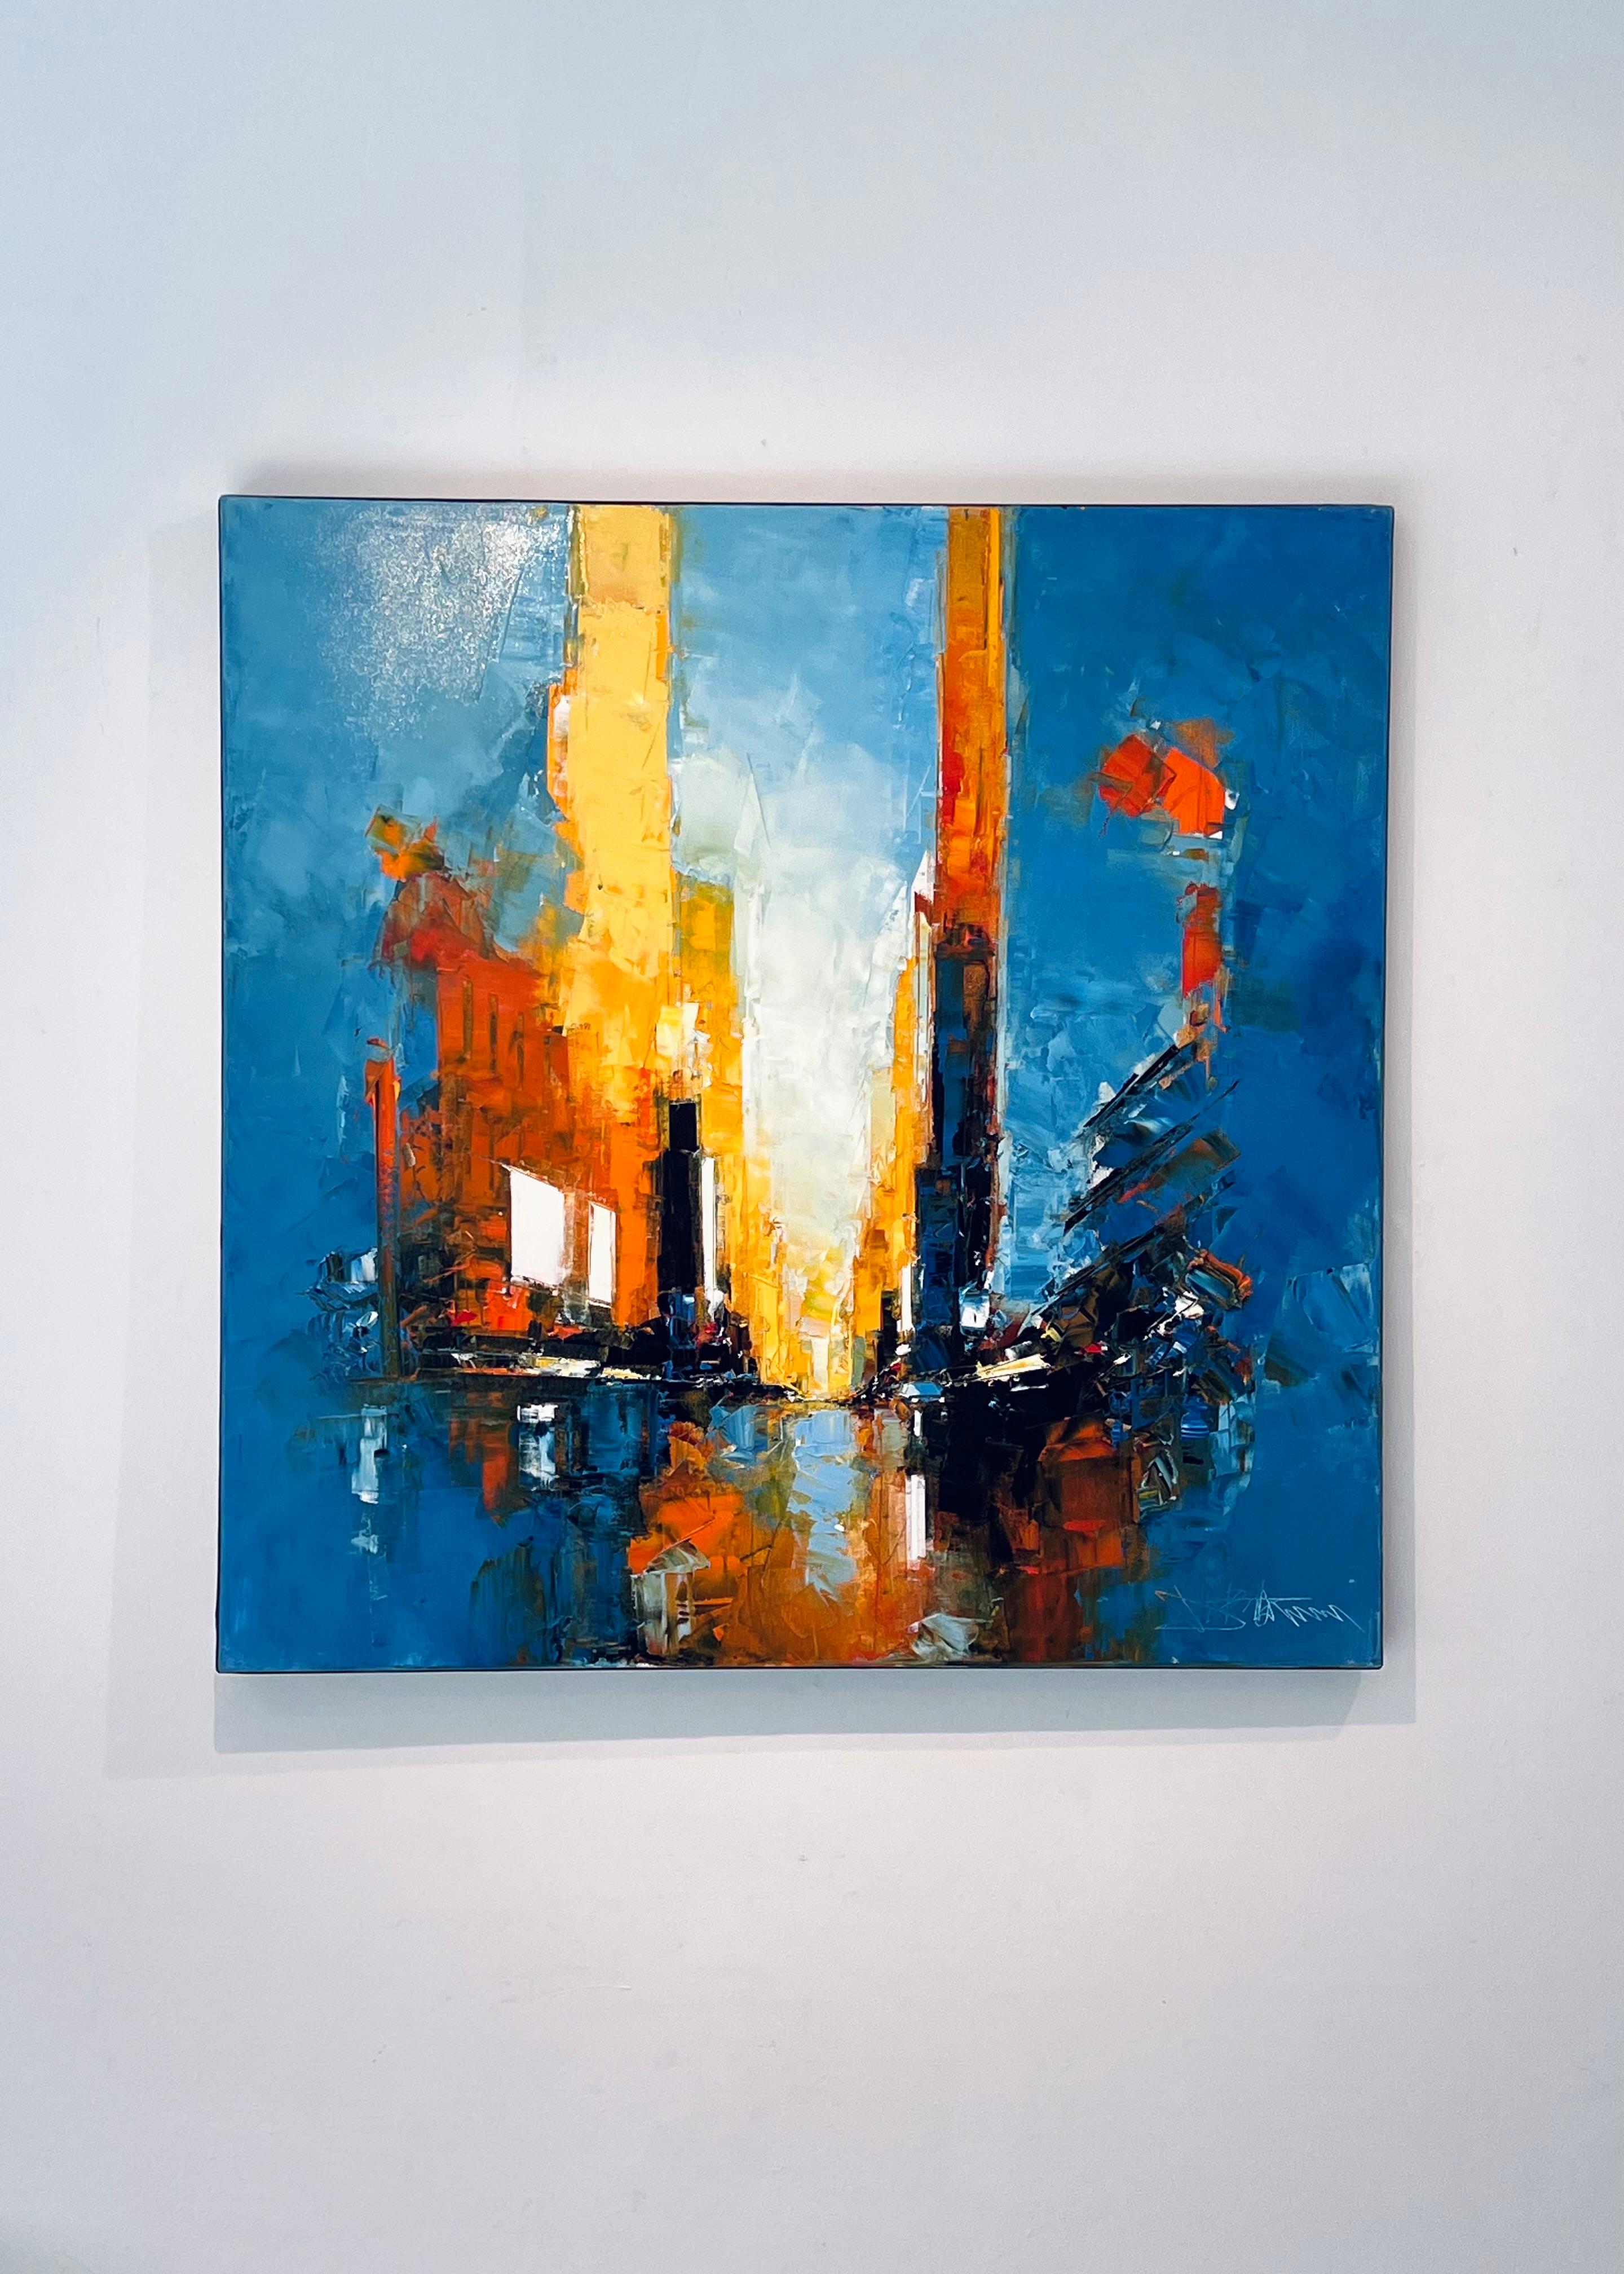 Manhattan NY I-original modern abstract cityscape oil painting-contemporary art - Painting by Daniel Castan